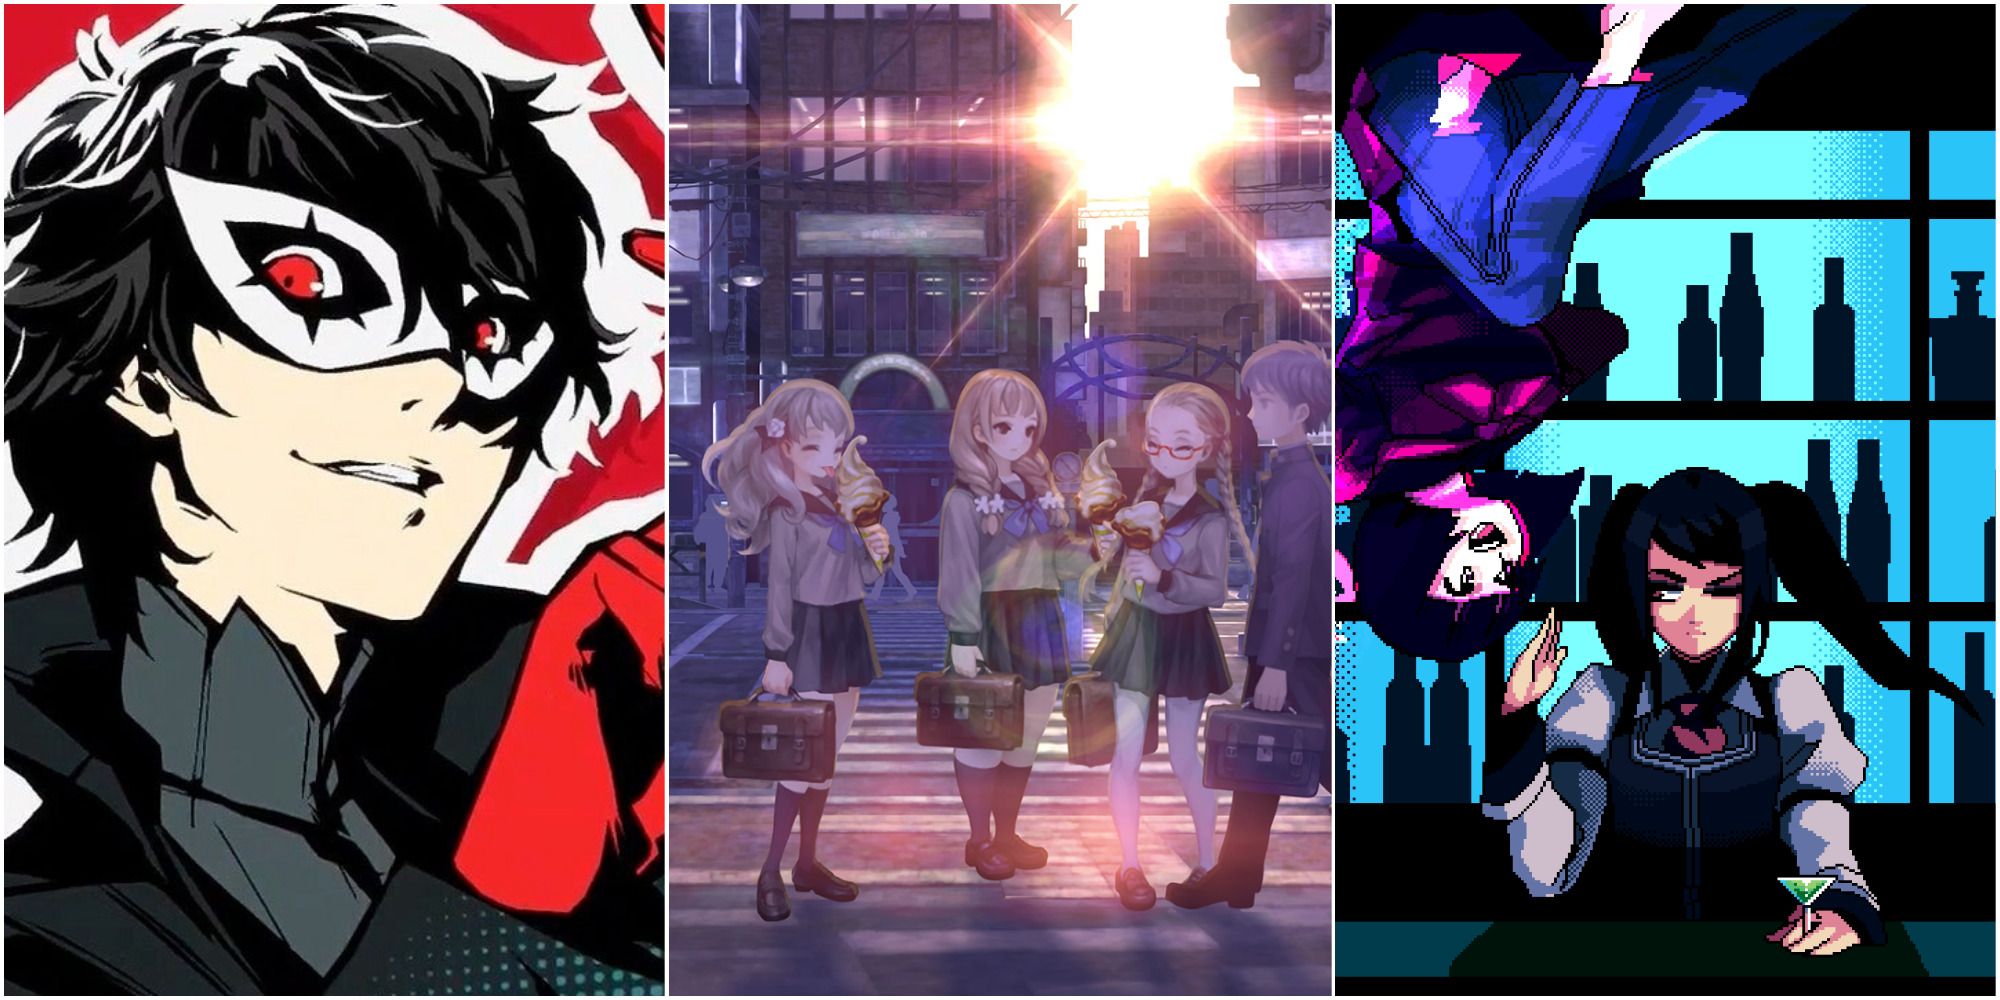 A collage of images from Persona 5, 13 Sentinels: Aegis Rim, and VA-11 Hall-A